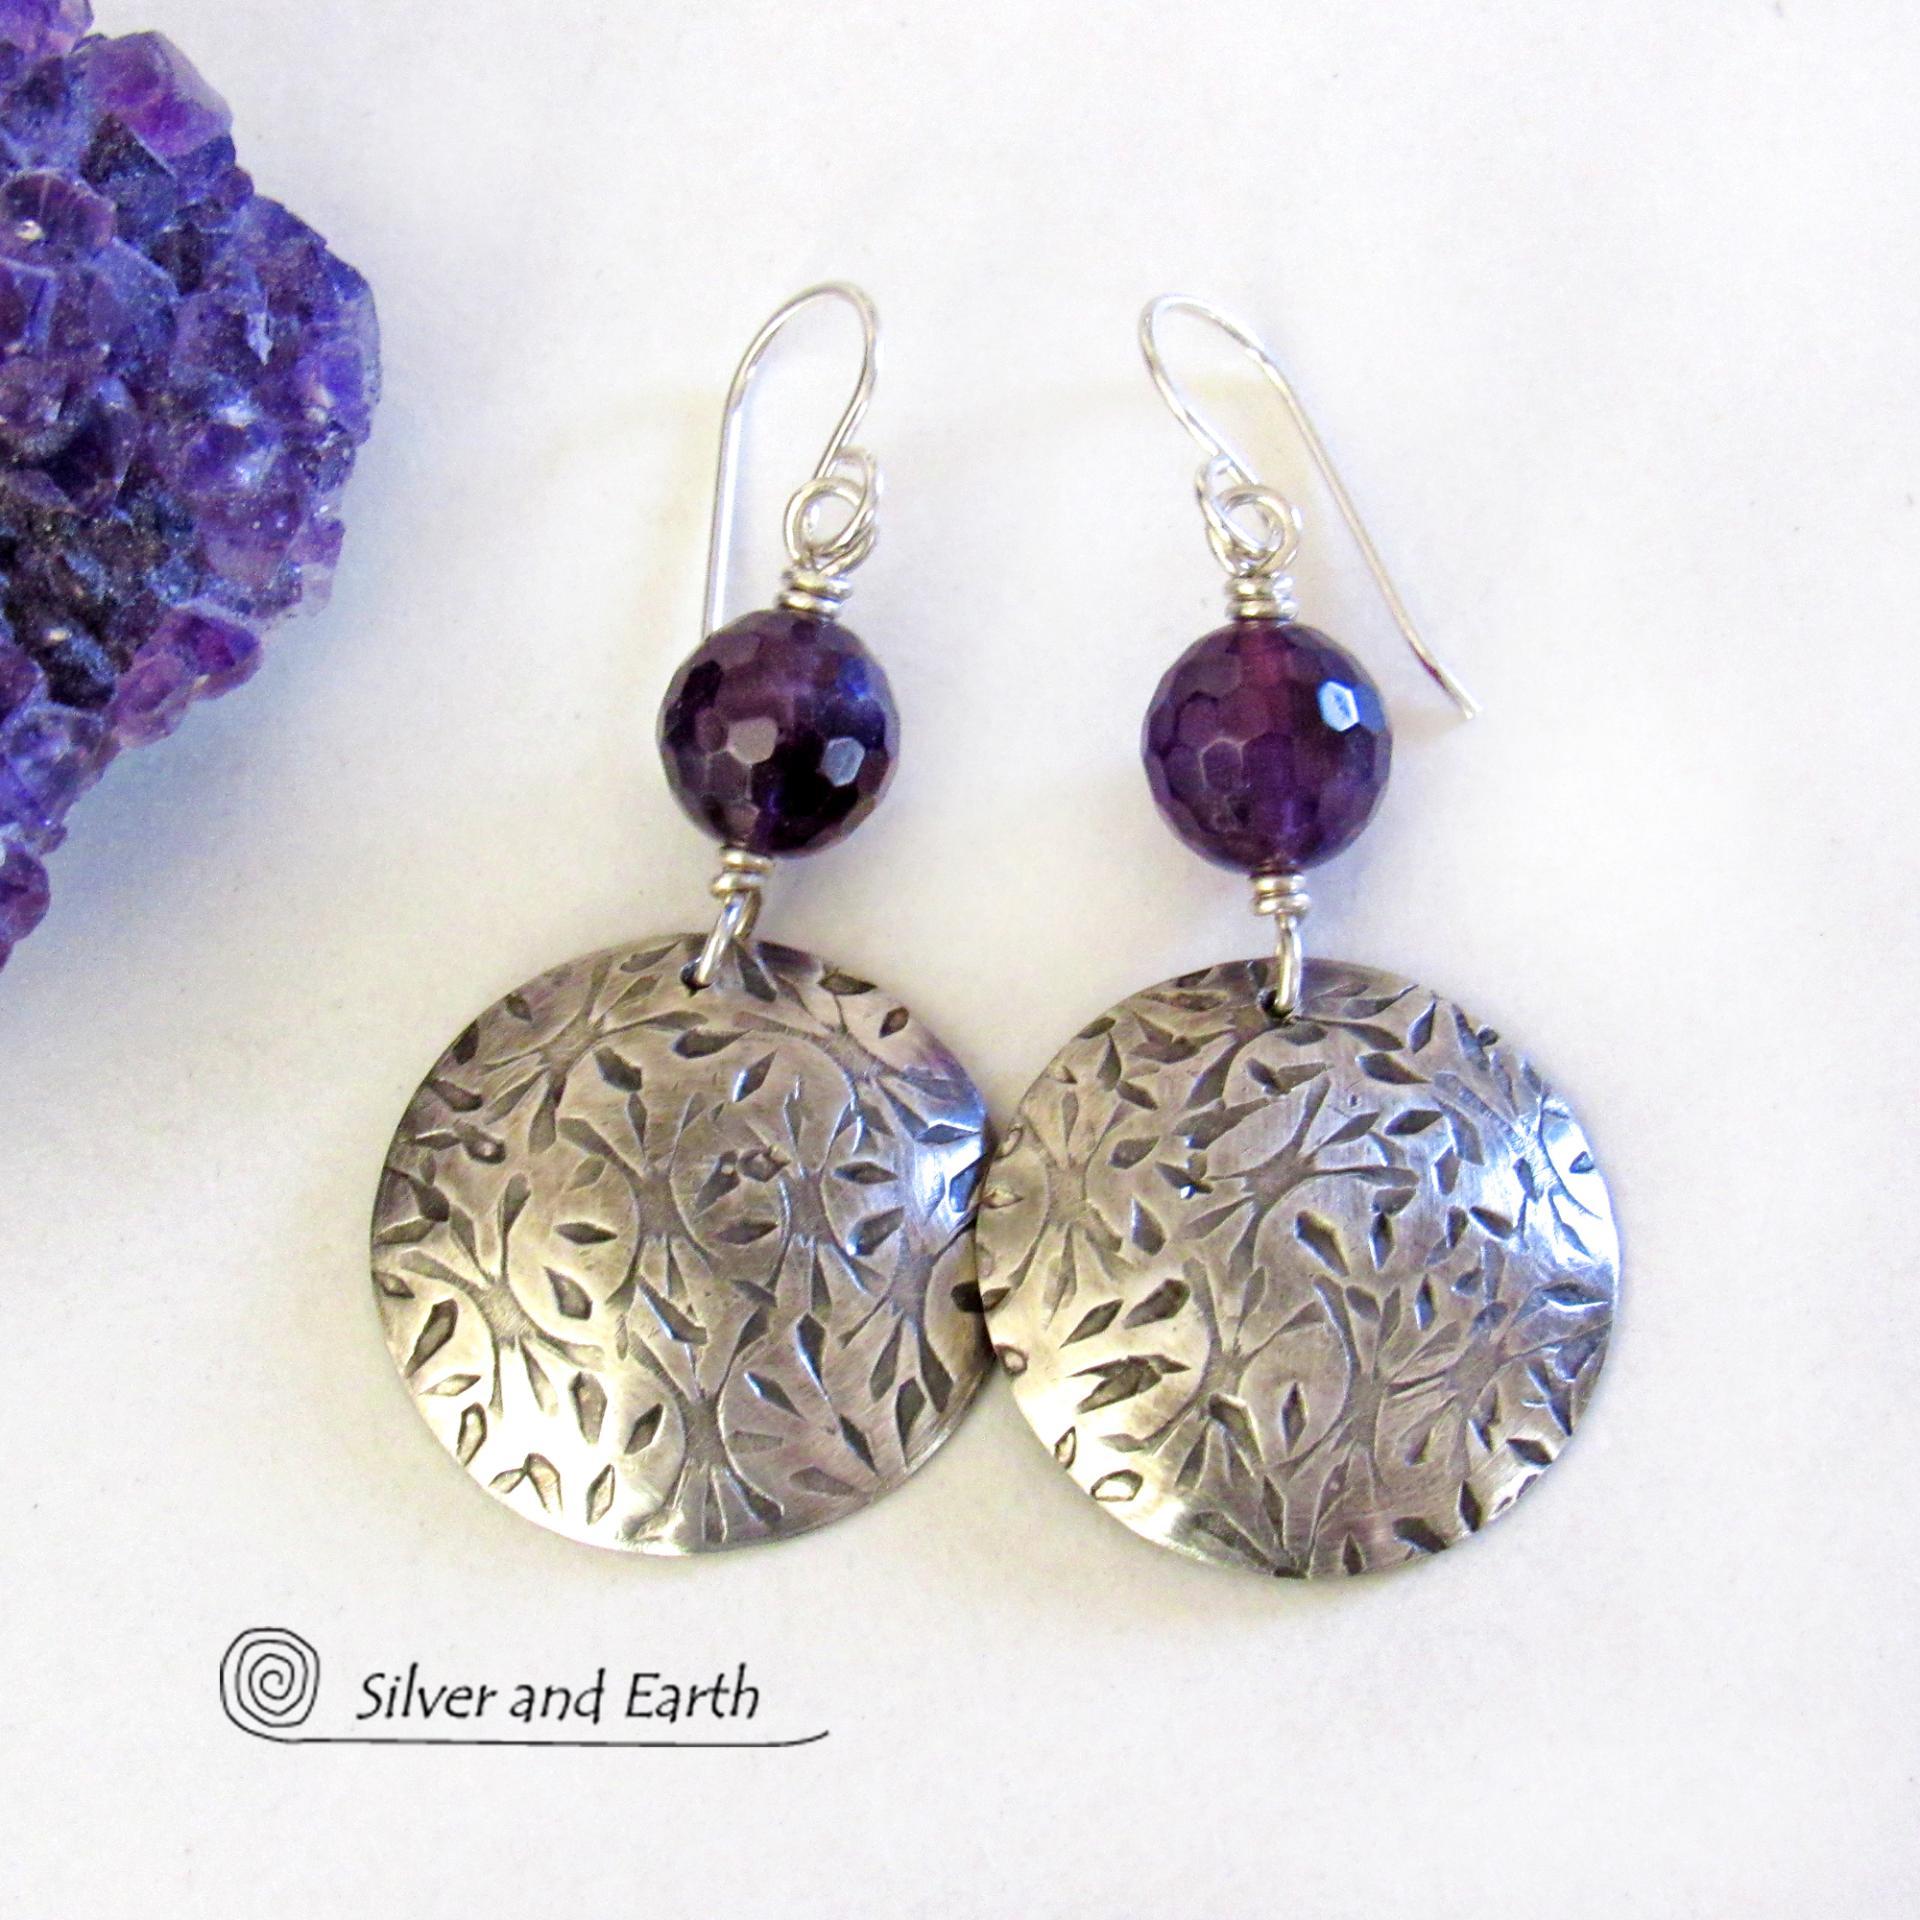 Round Sterling Silver Dangle Earrings with Faceted Amethyst Gemstones - February Birthstone Jewelry 